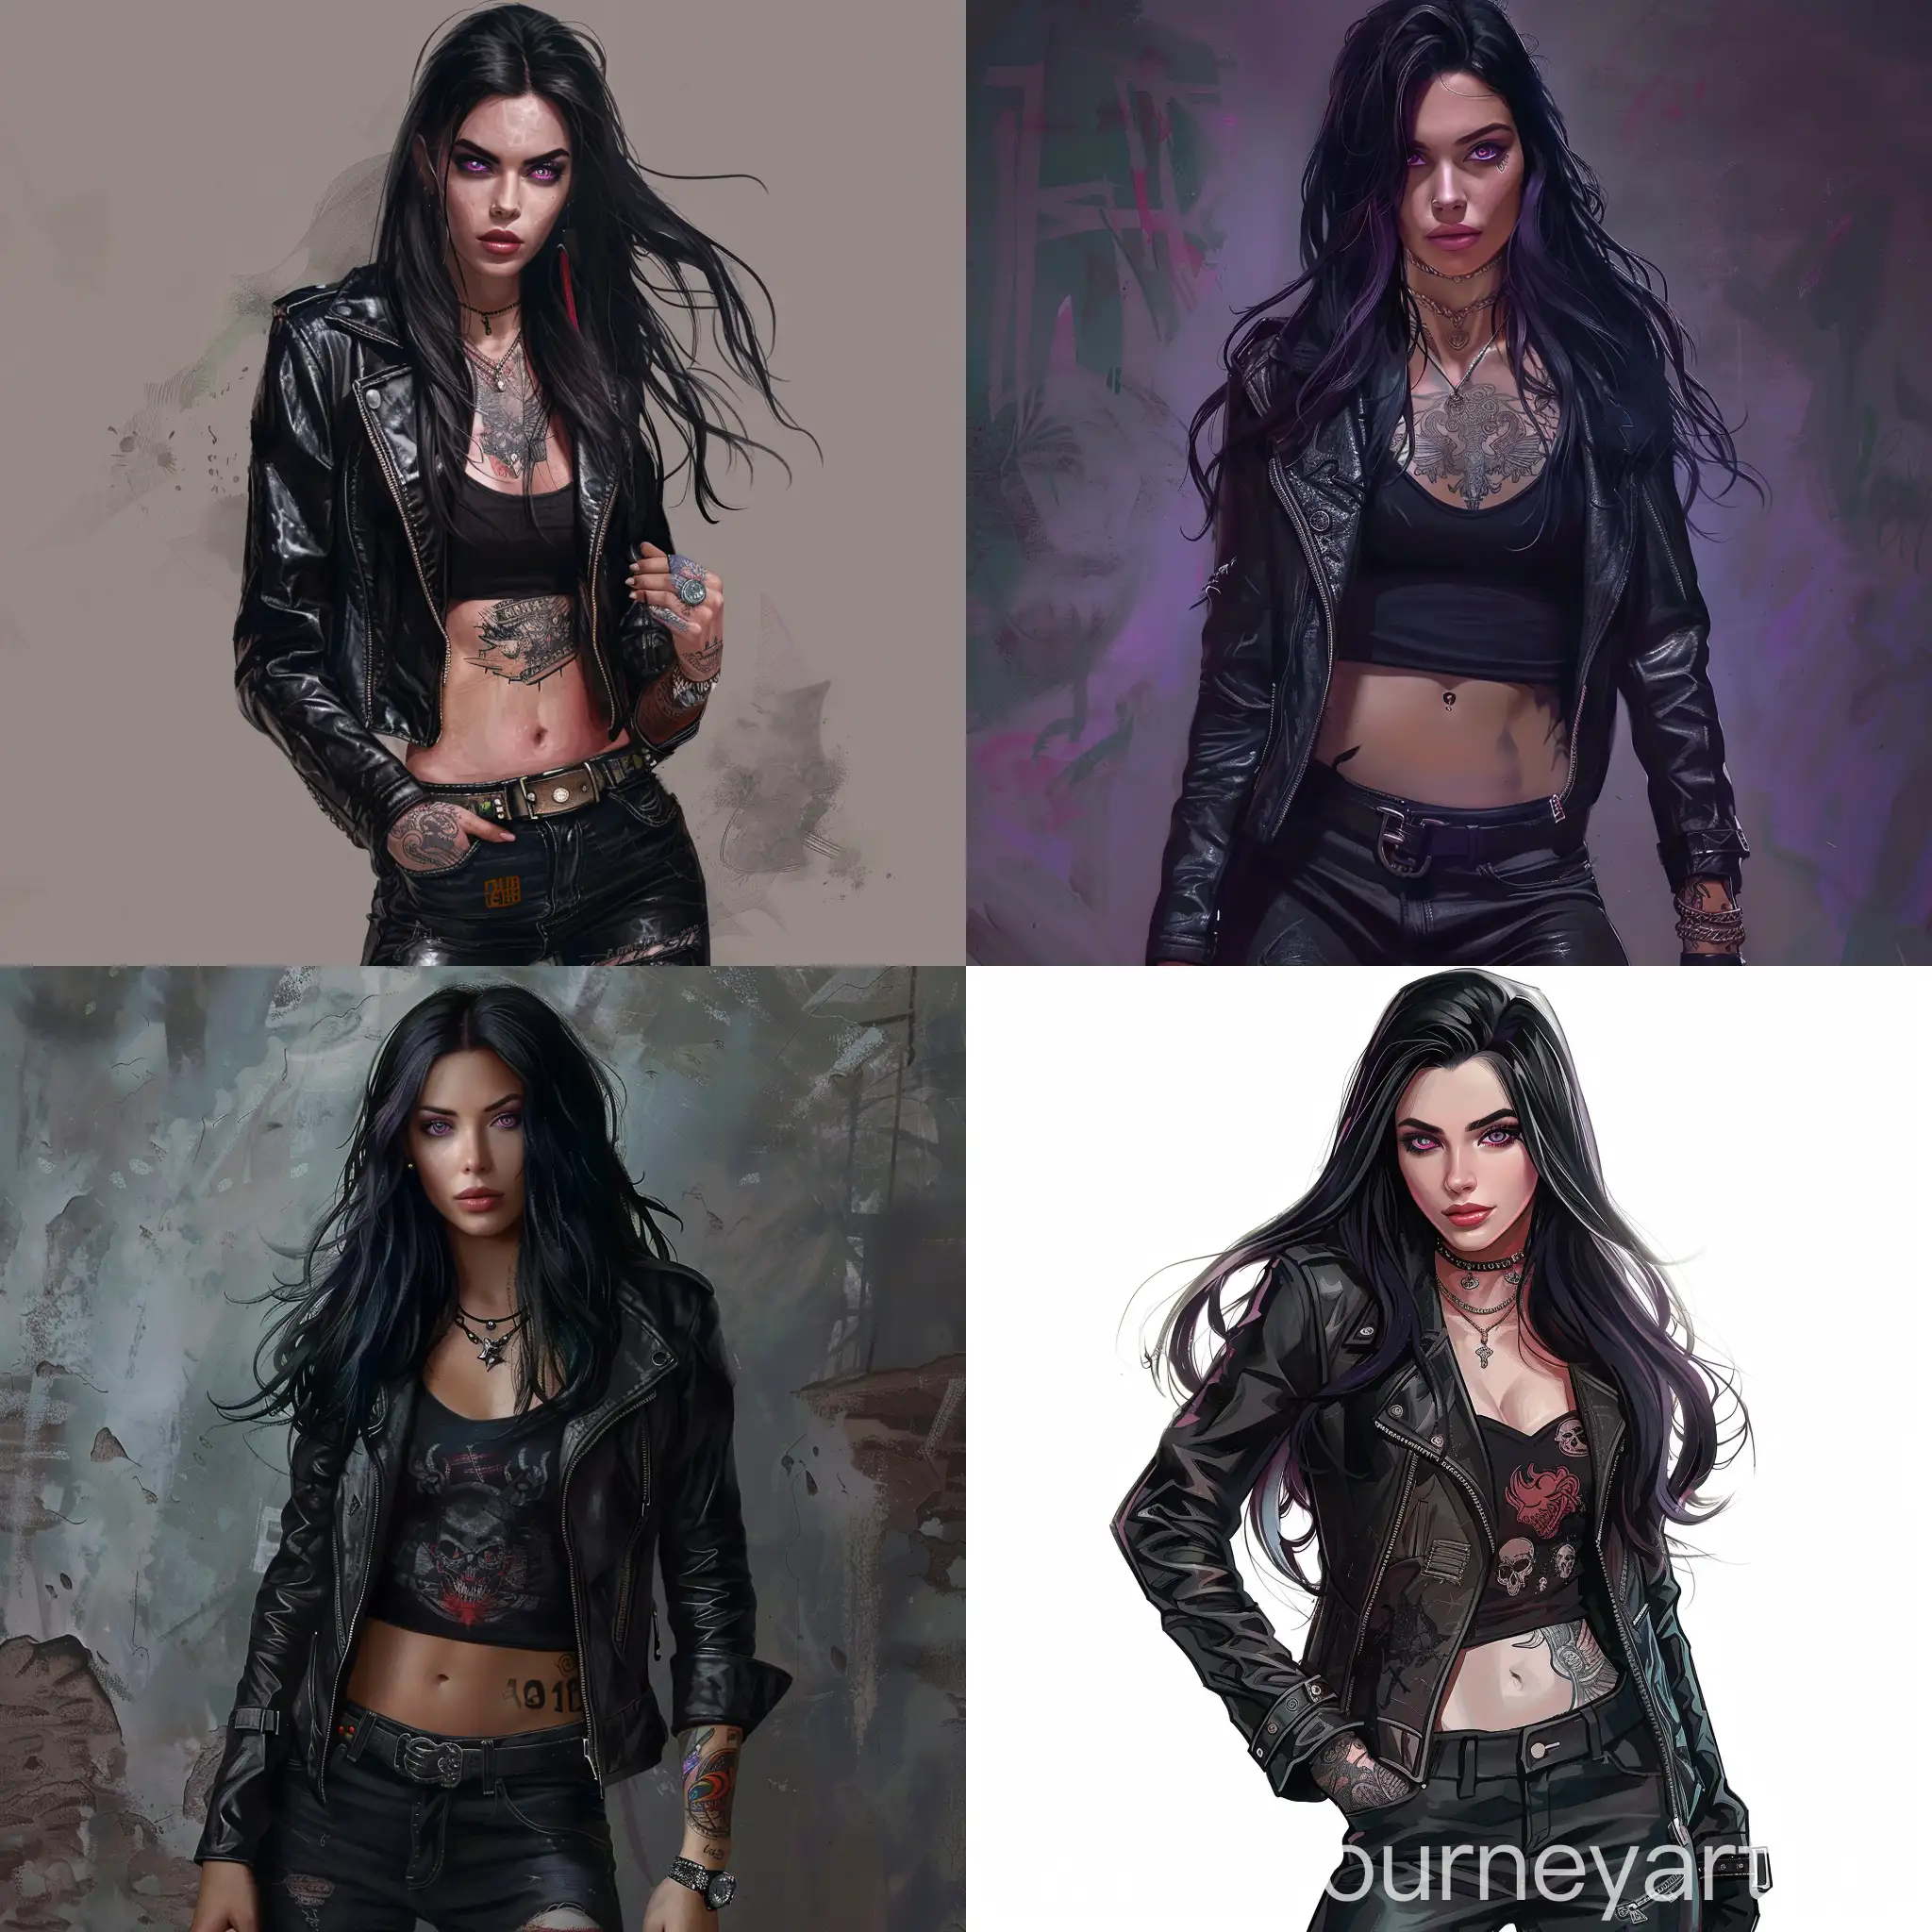 Woman: 28 years old: tall: muscular build: rough facial features: ample breasts: tattoos on the arms: fair skin: black long hair: purple eyes. She wears a black leather jacket, a T-shirt with a rock band and black leather pants.